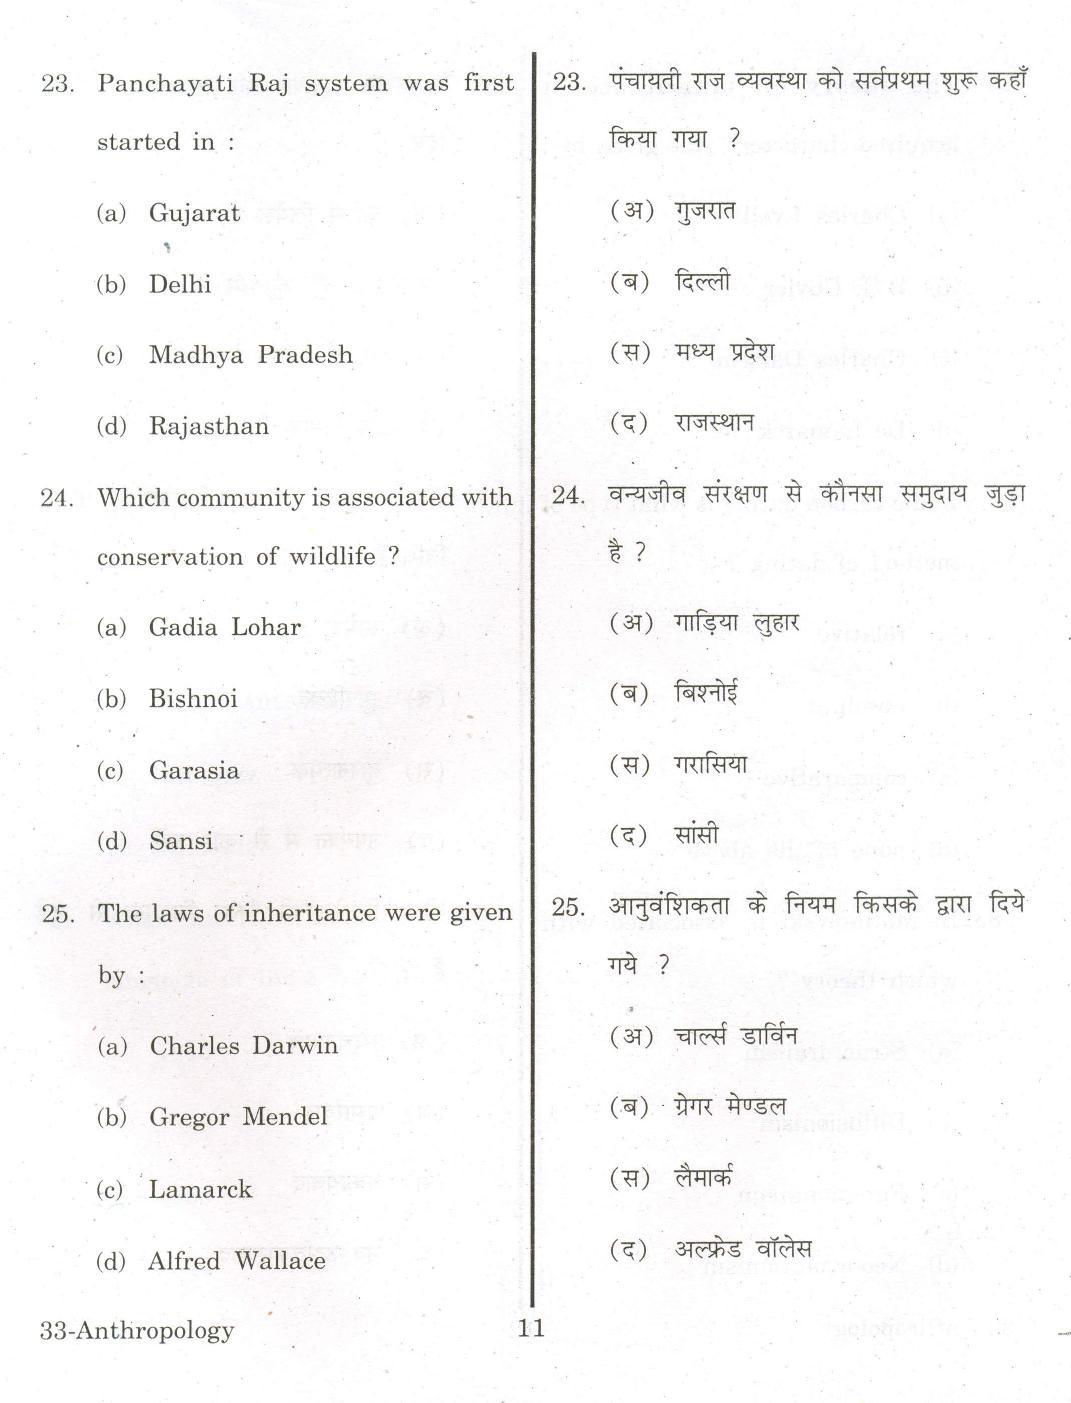 URATPG Anthropology 2013 Question Paper - Page 10